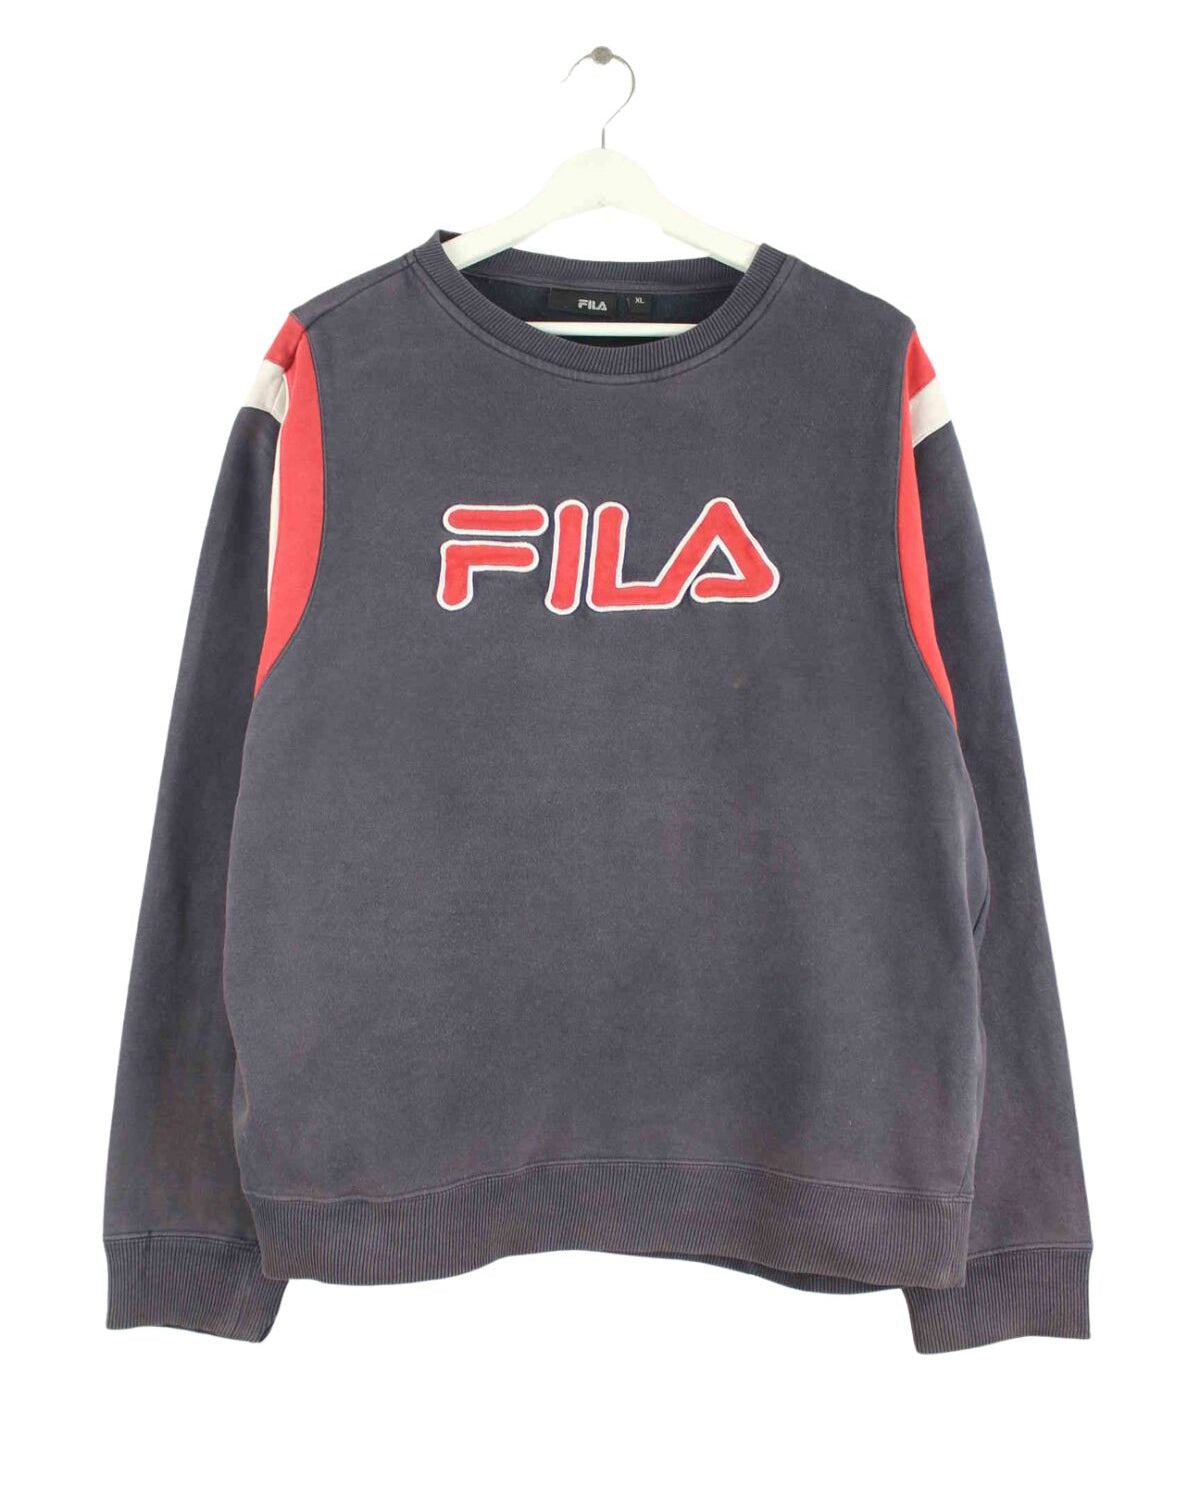 Fila Embroidered Sweater Blau XL (front image)